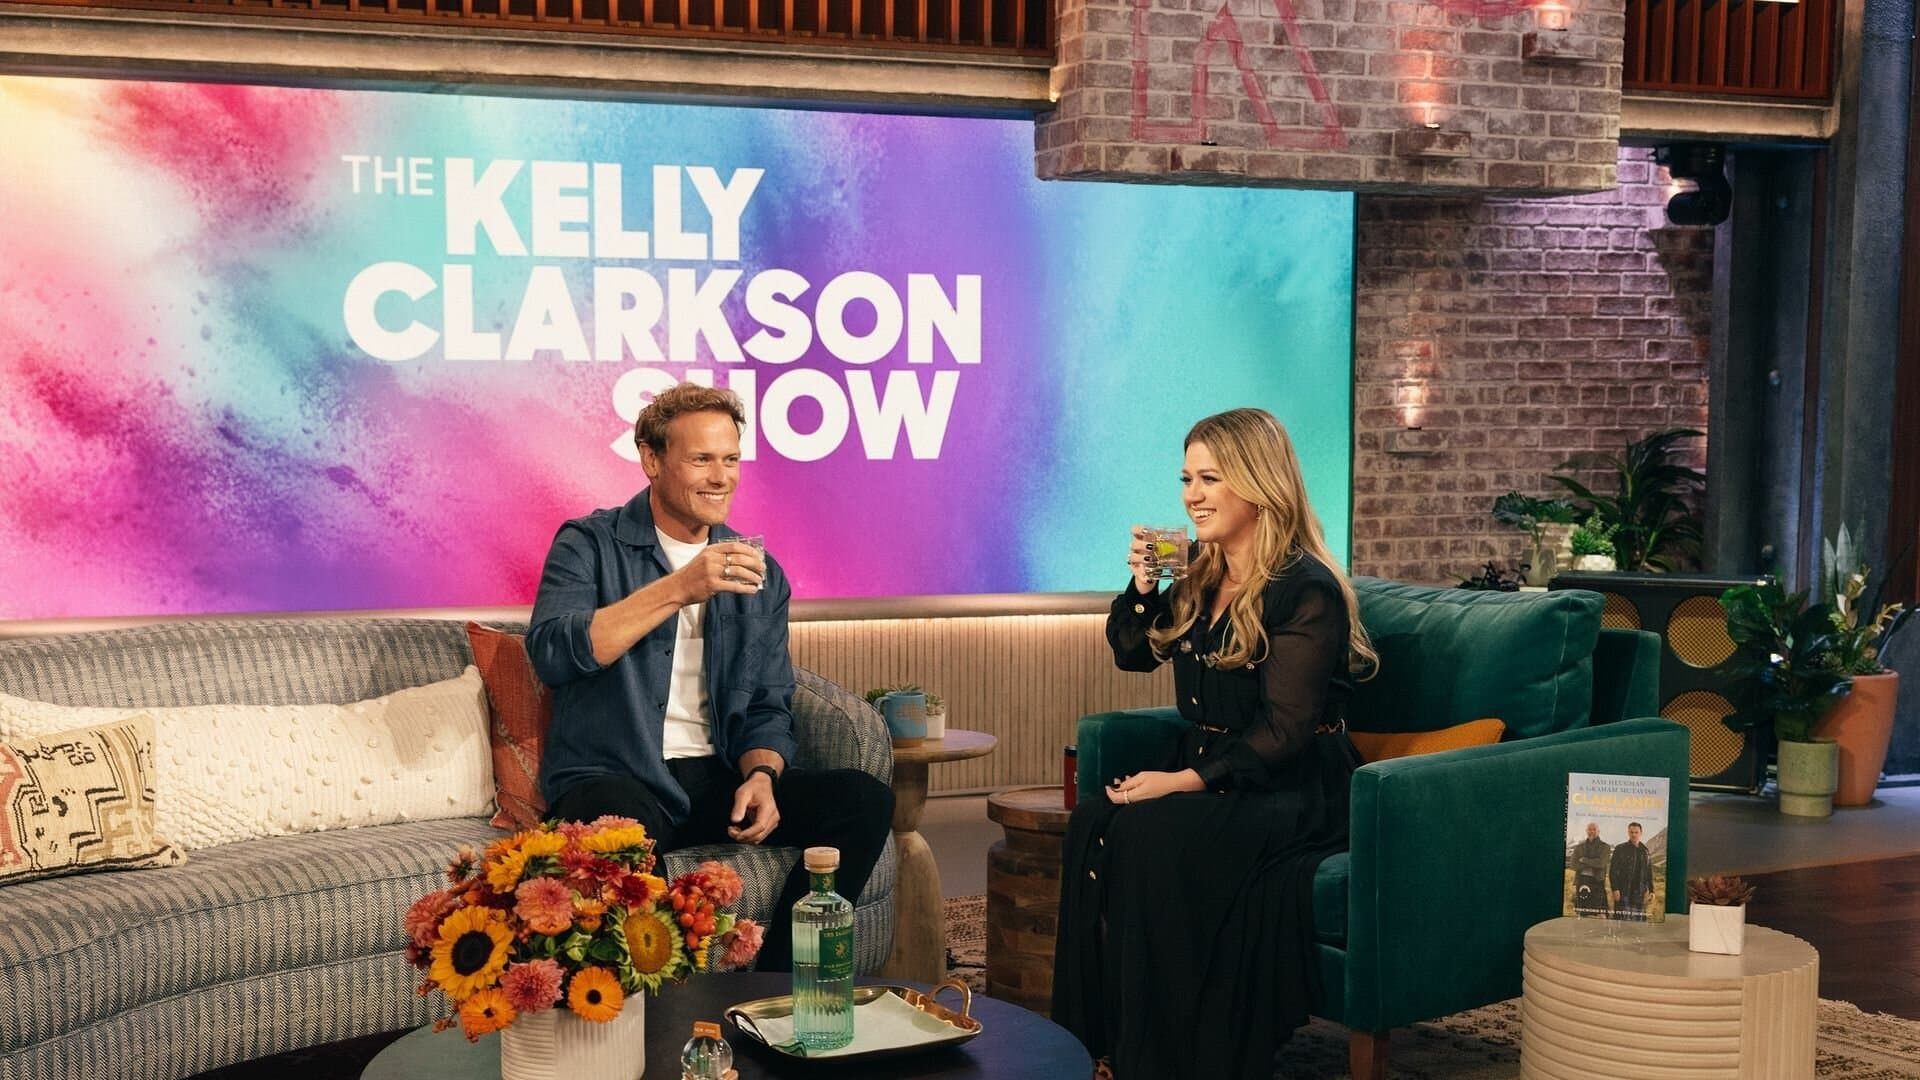 The Kelly Clarkson Show background